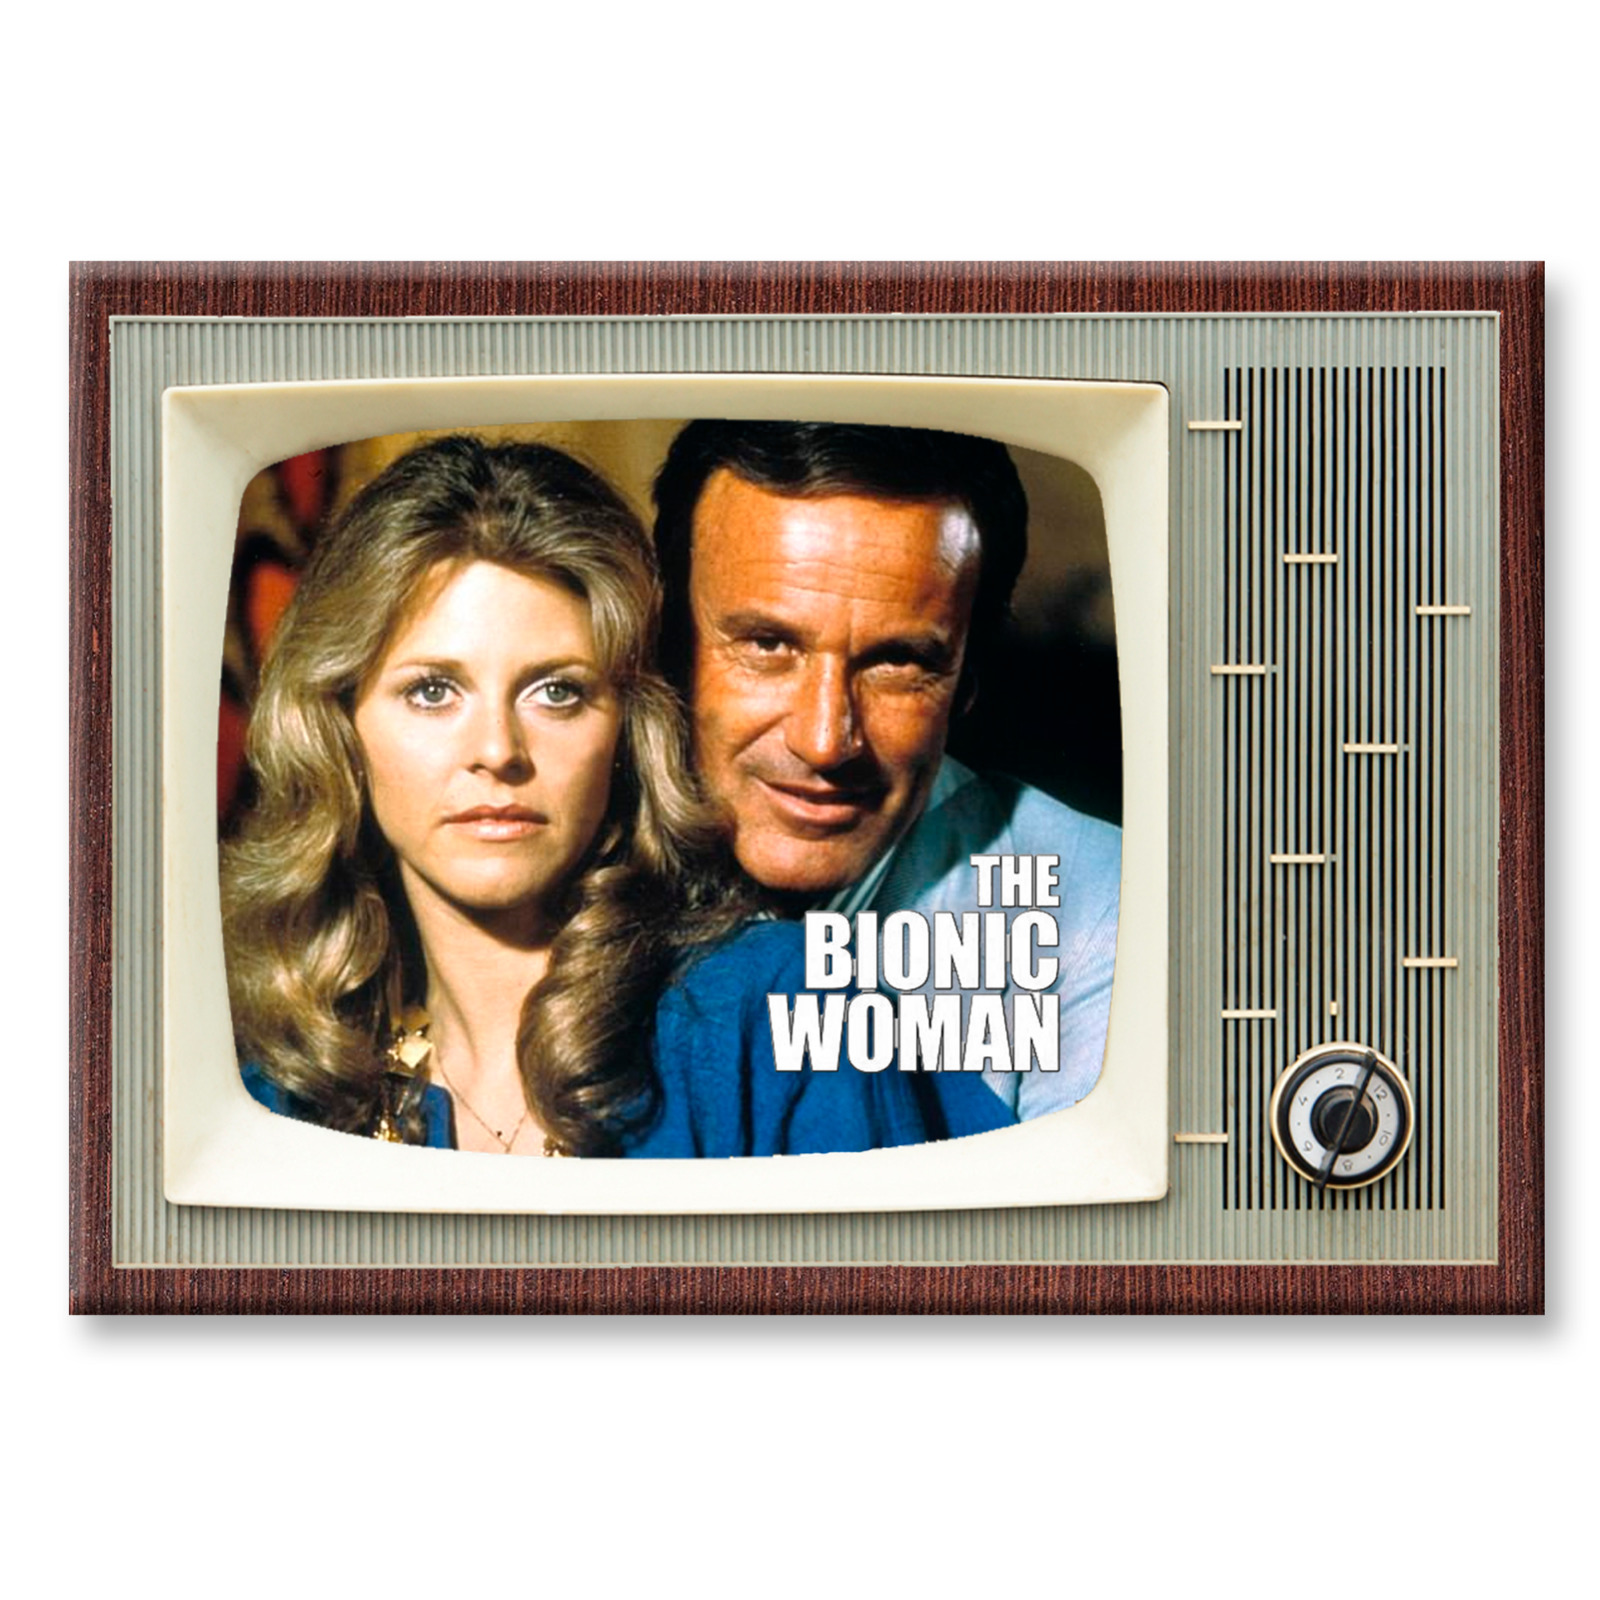 Bionic Woman TV Show Classic TV 3.5 inches x 2.5 inches Steel Fridge Magnet